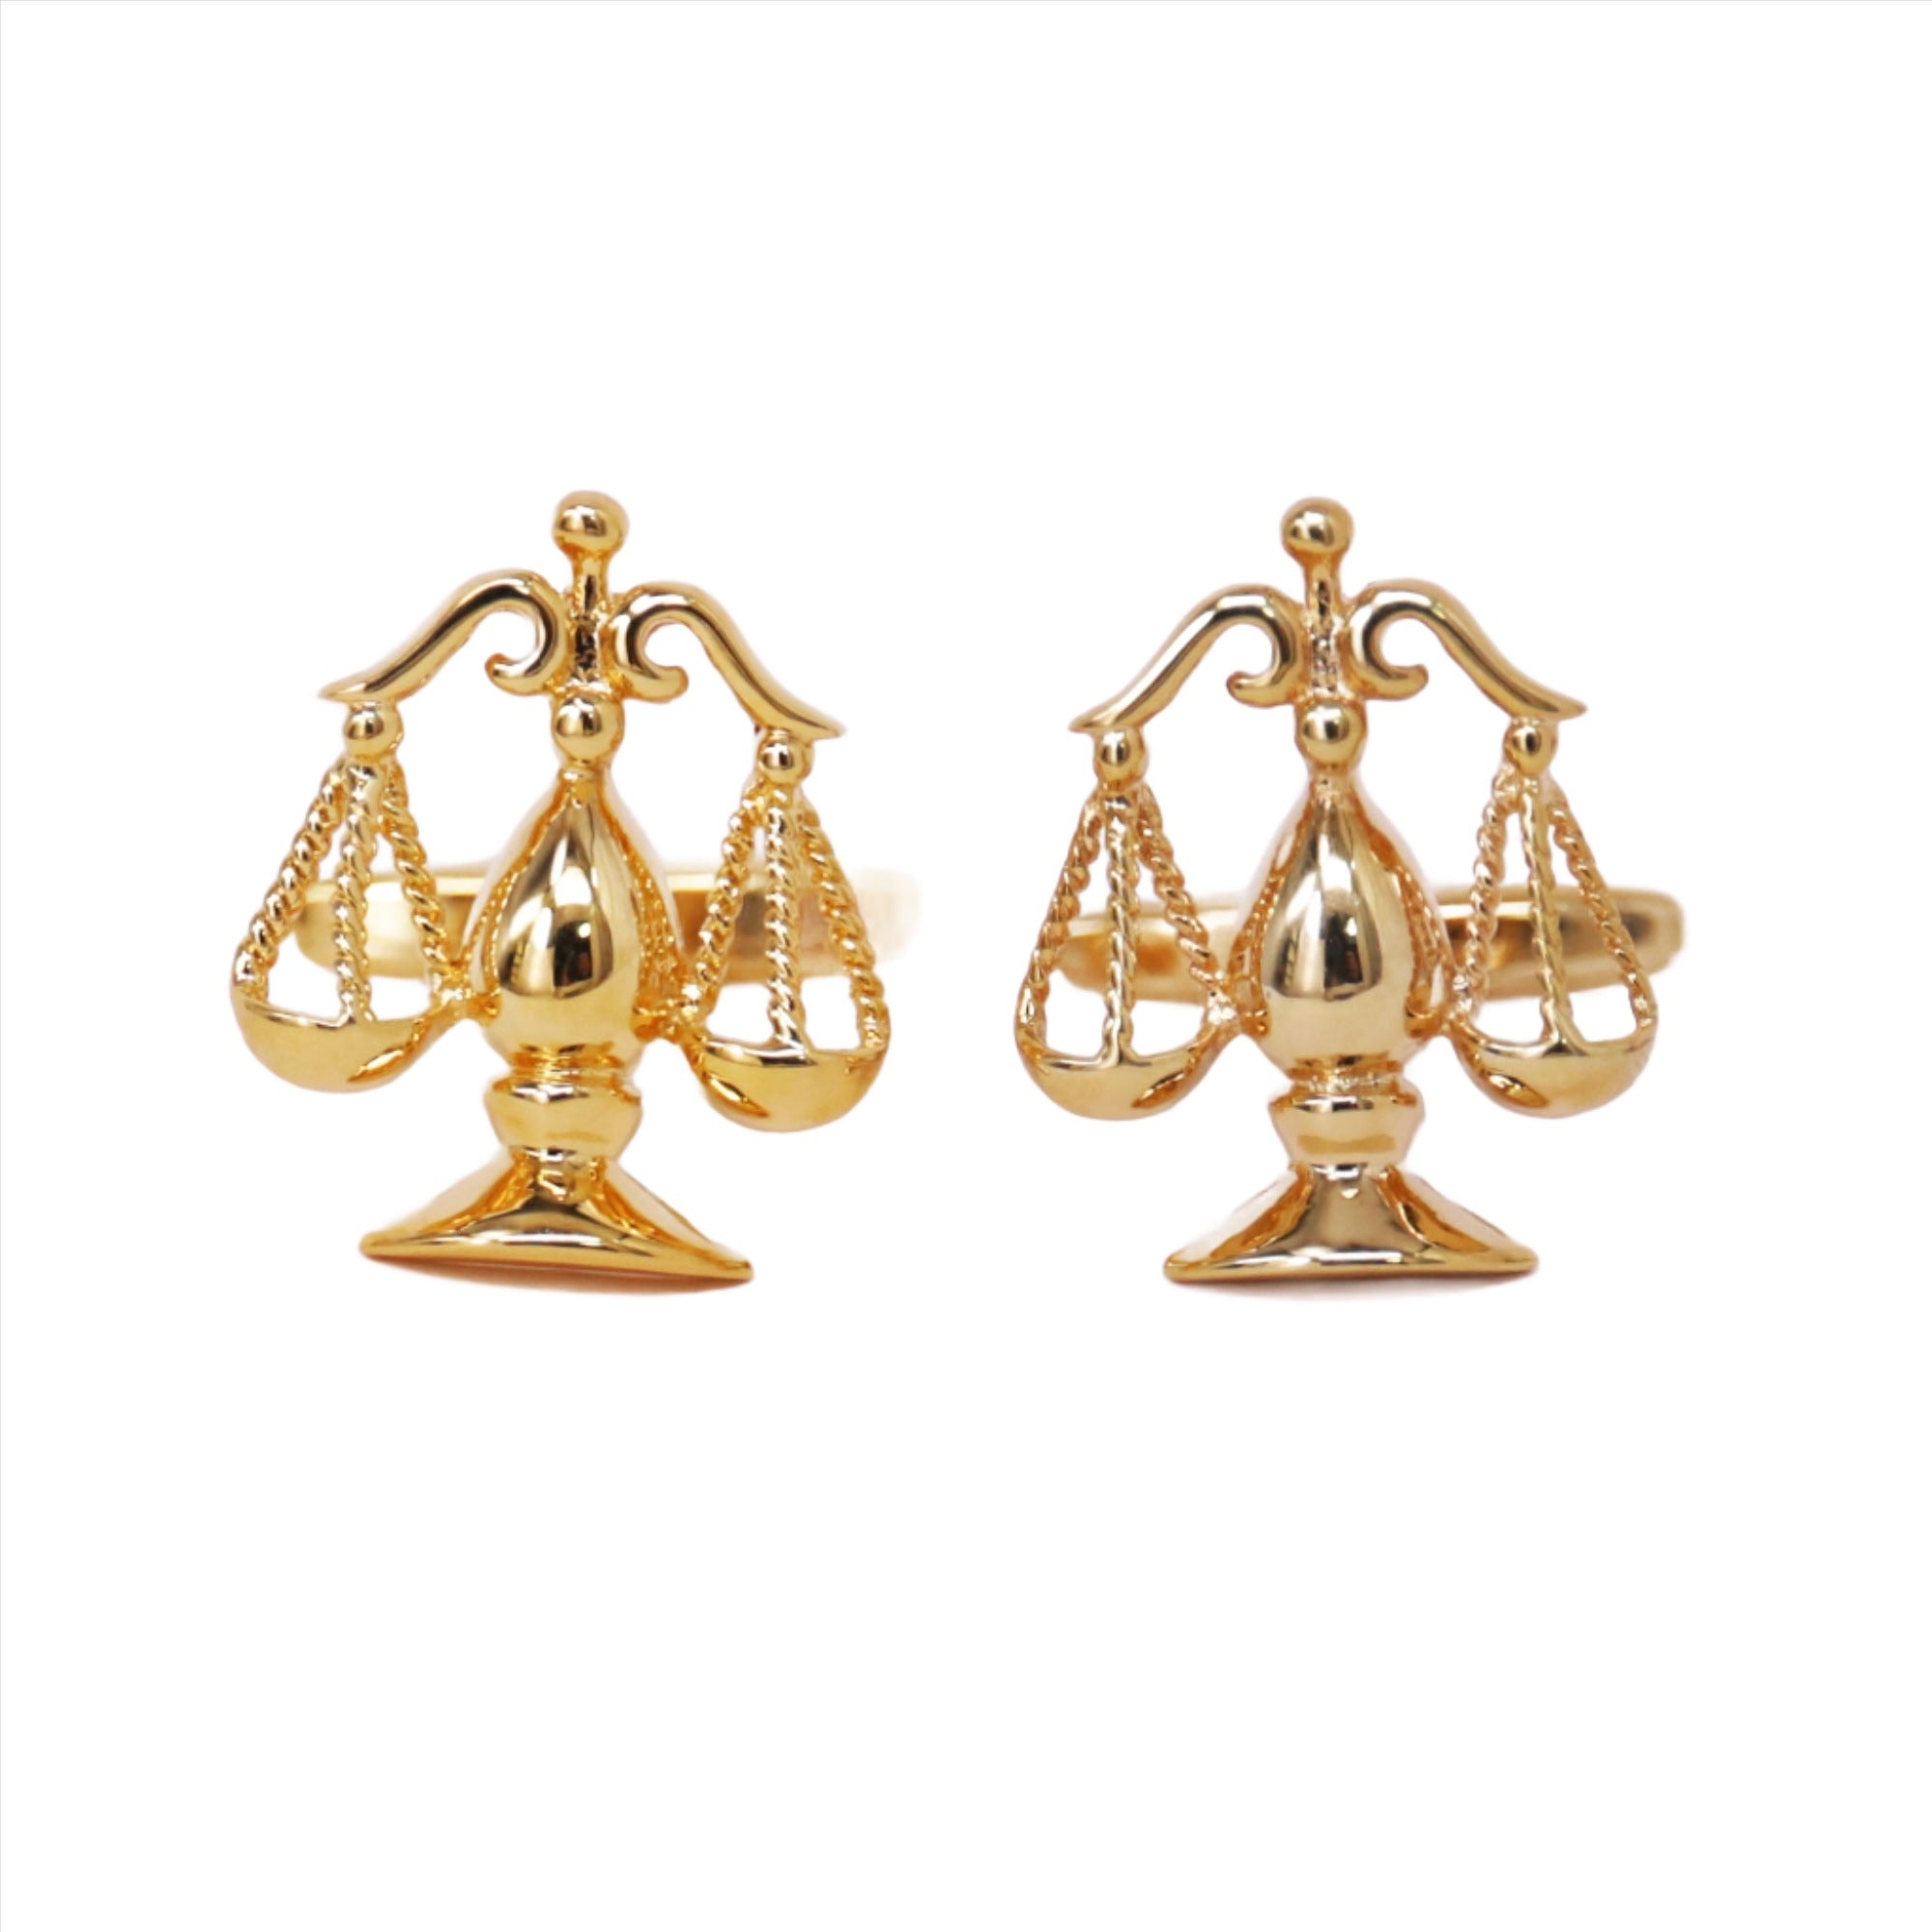 Scales of Justice Cufflinks Lawyer Judge Gold Cuff Links